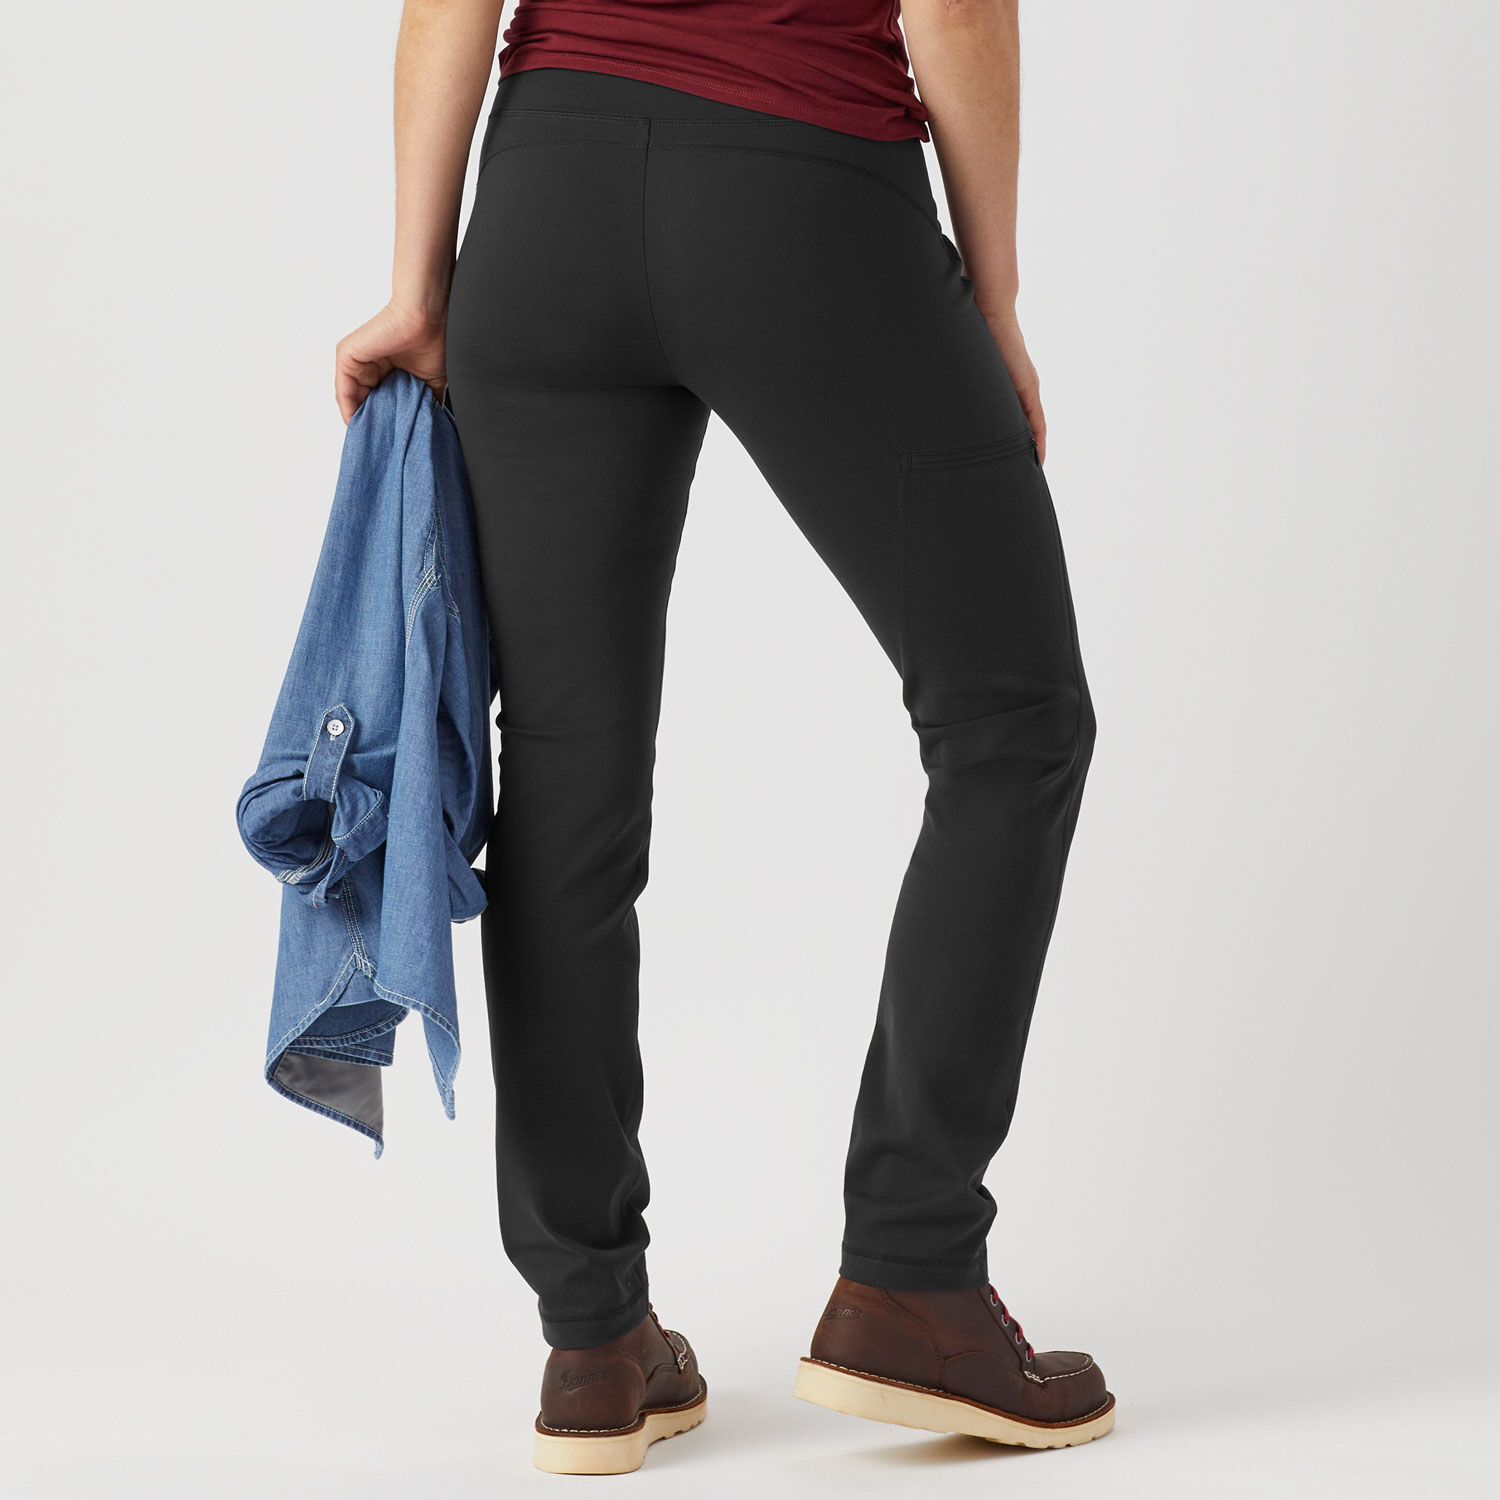 Women's Skinny Fit Travel Pants | Skinny Travel Clothing for Women –  Anatomie